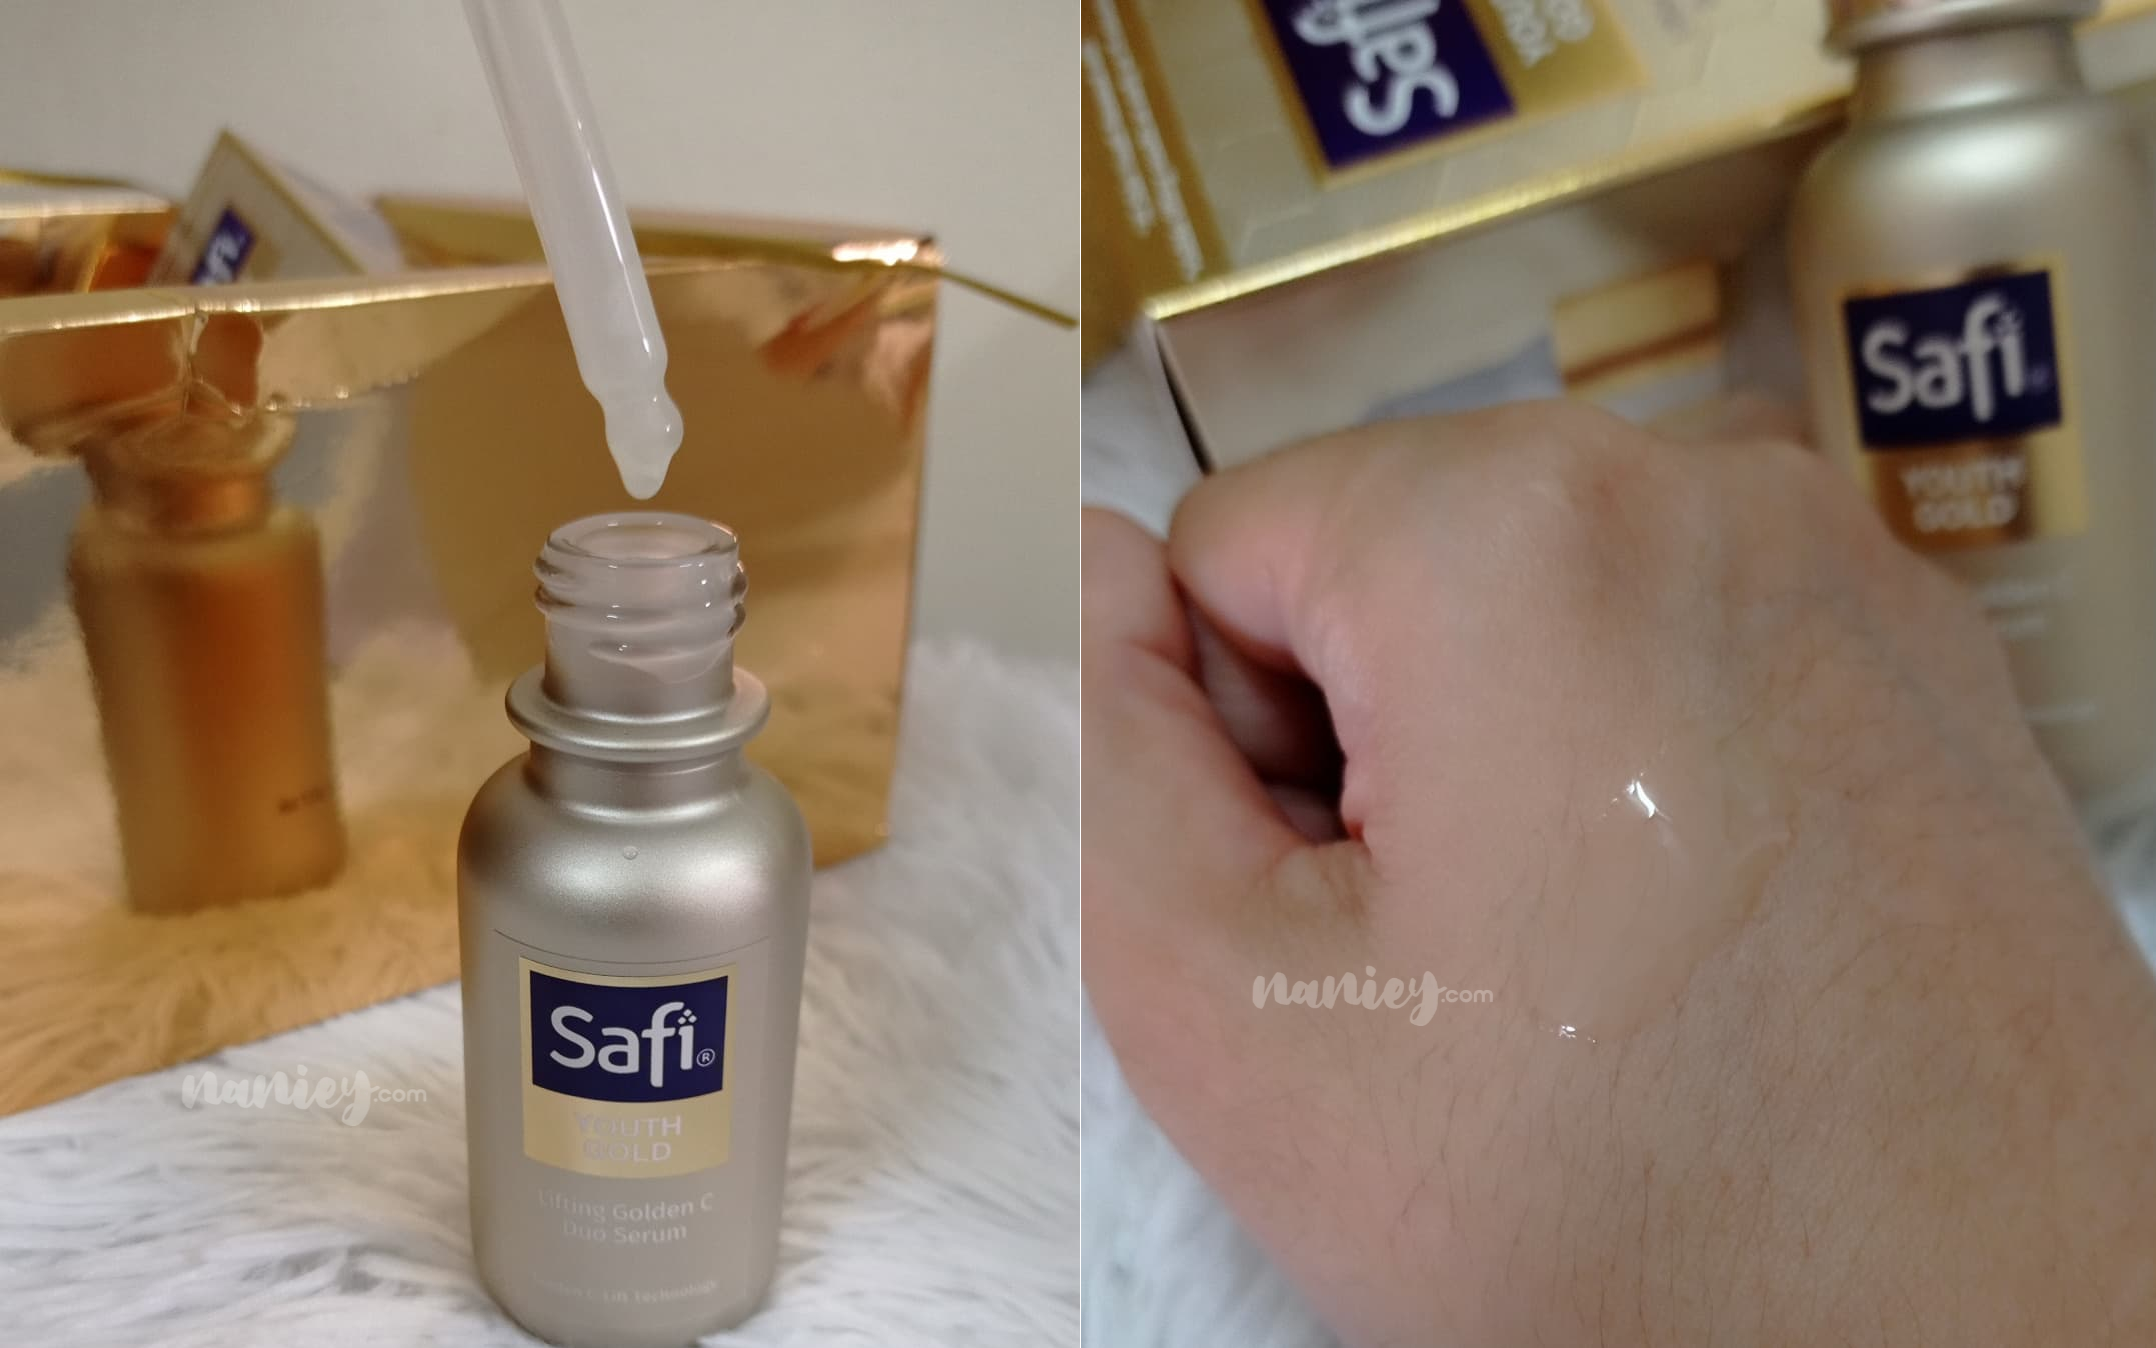 Review Safi Youth Gold Lifting Golden C Duo Serum